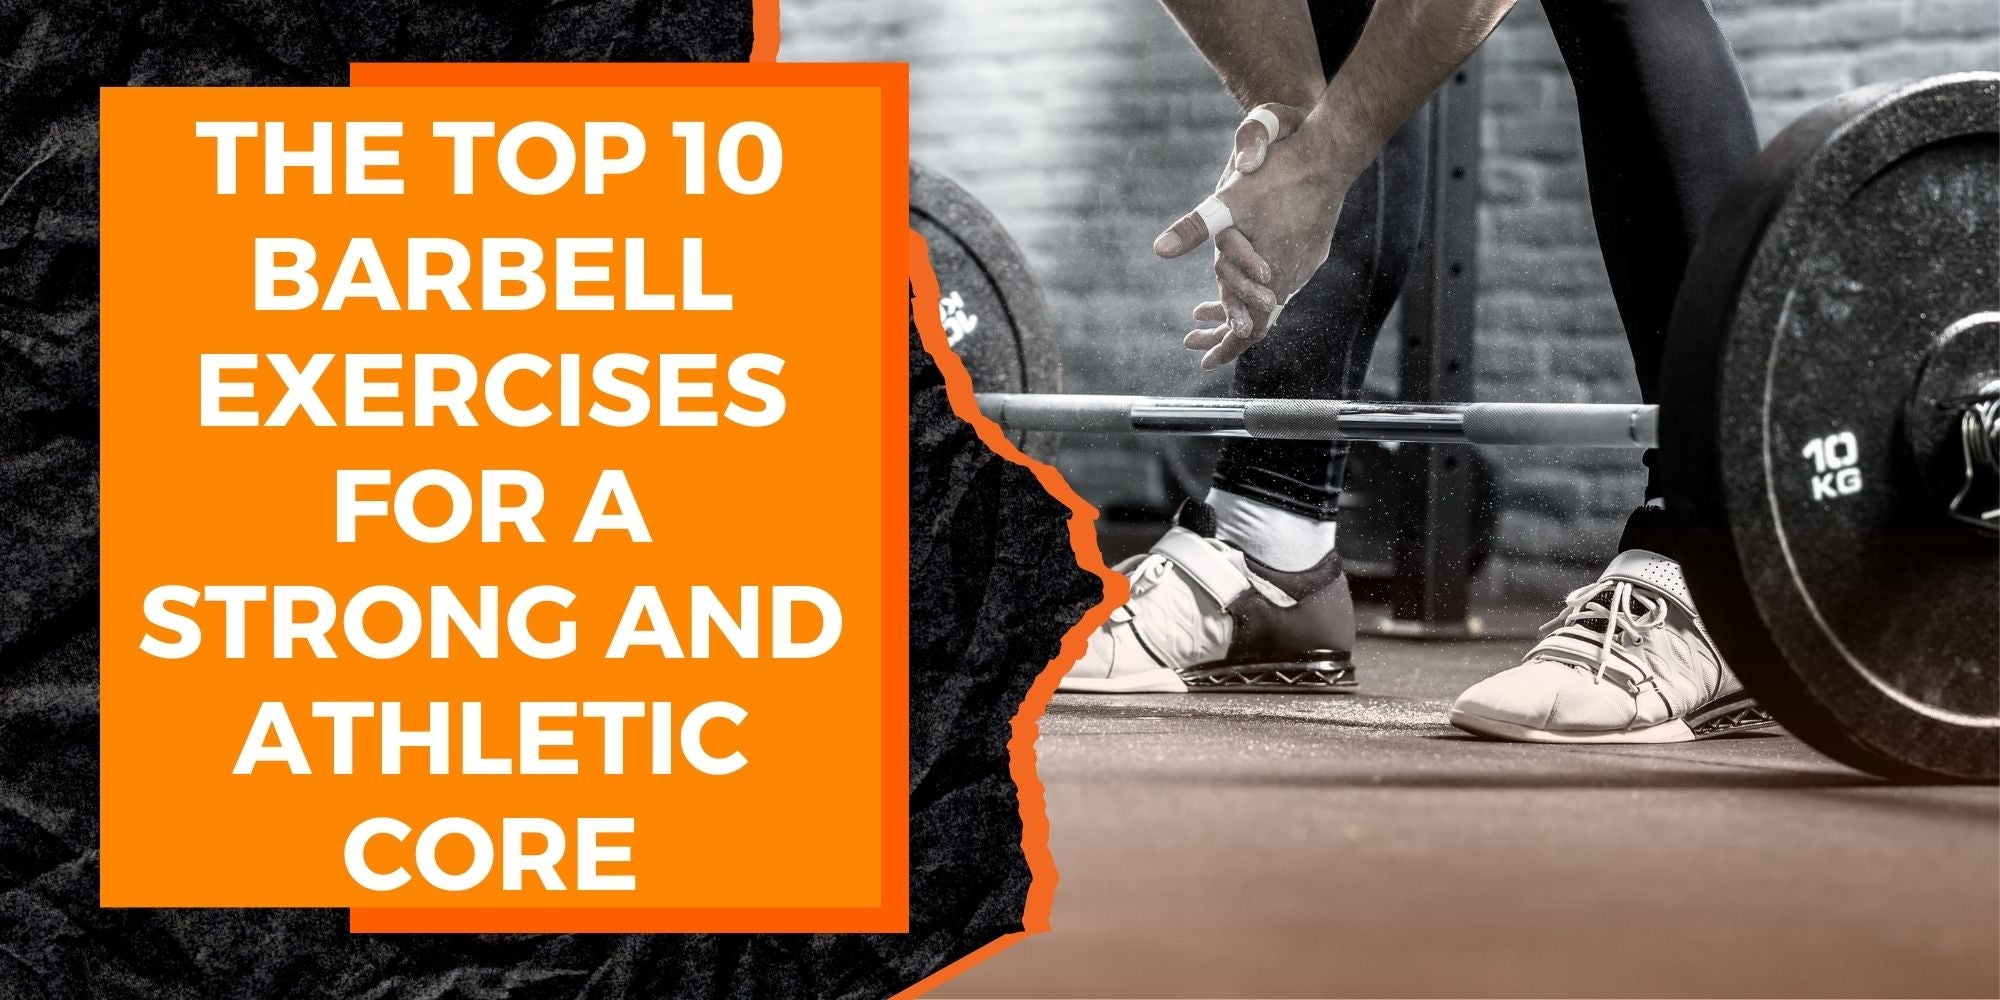 The Top 10 Barbell Exercises for a Strong and Athletic Core